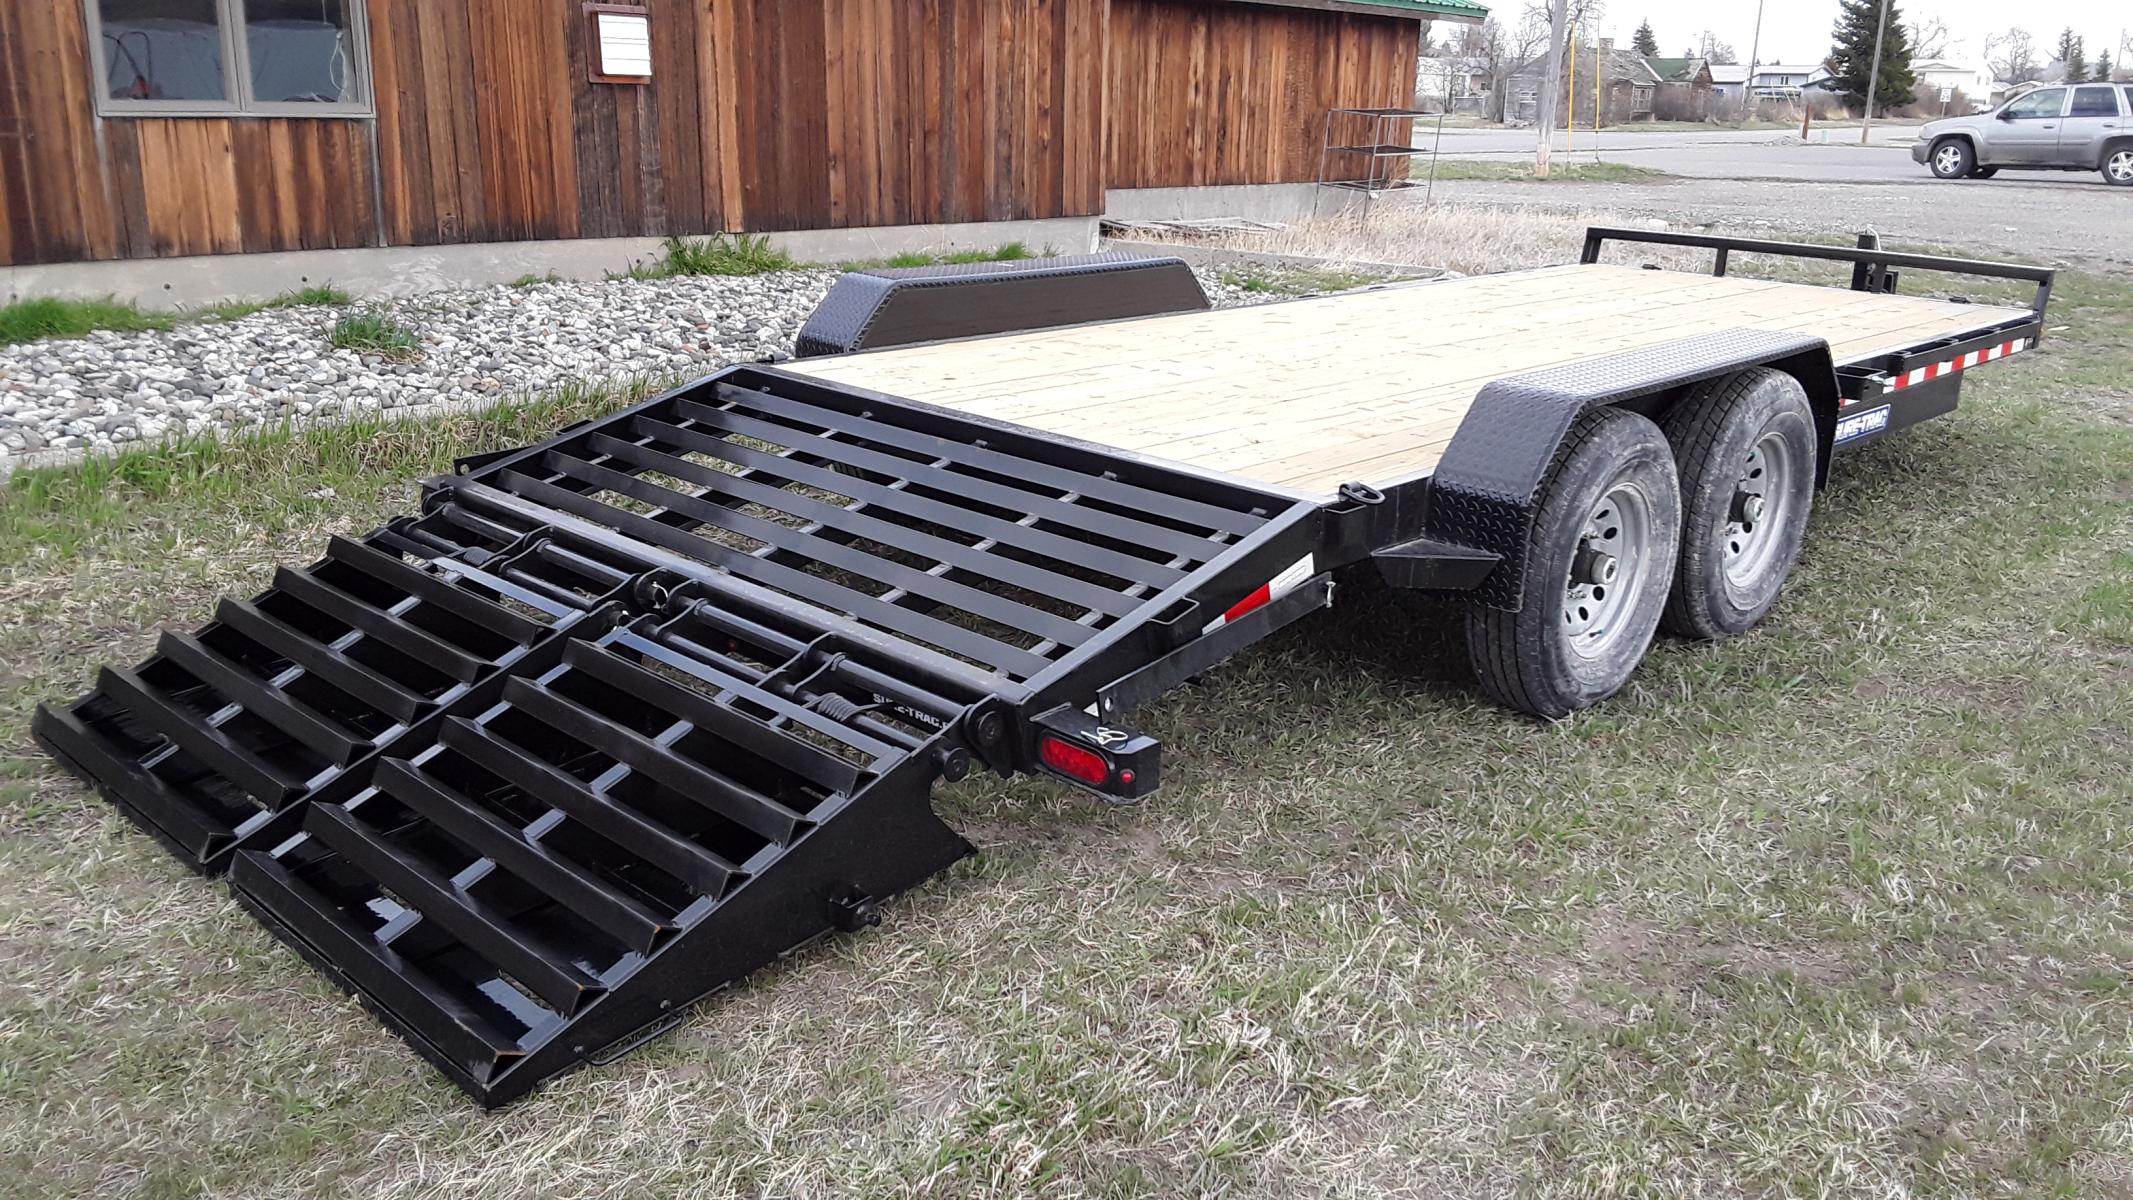 2022 Black SureTrac 7 x 17 + 3 Equipment , located at 310 West 1st Ave, Big Timber, MT, 59011, (406) 860-8510, 45.833511, -109.957809 - SureTrac 7 x 17 + 3 Universal Ramp Equipment, 14K GVW, (2) - 7K GVW axles with EZ lube hubs, HD slipper spring suspension, electric brakes both axles, LED lights, 2 x 6 treated wood deck, 6" c-channel frame, 6" c-channel full wrap tongue, 2 - 5/16" adjustable coupler, 7K drop leg set back jack, stak - Photo #5